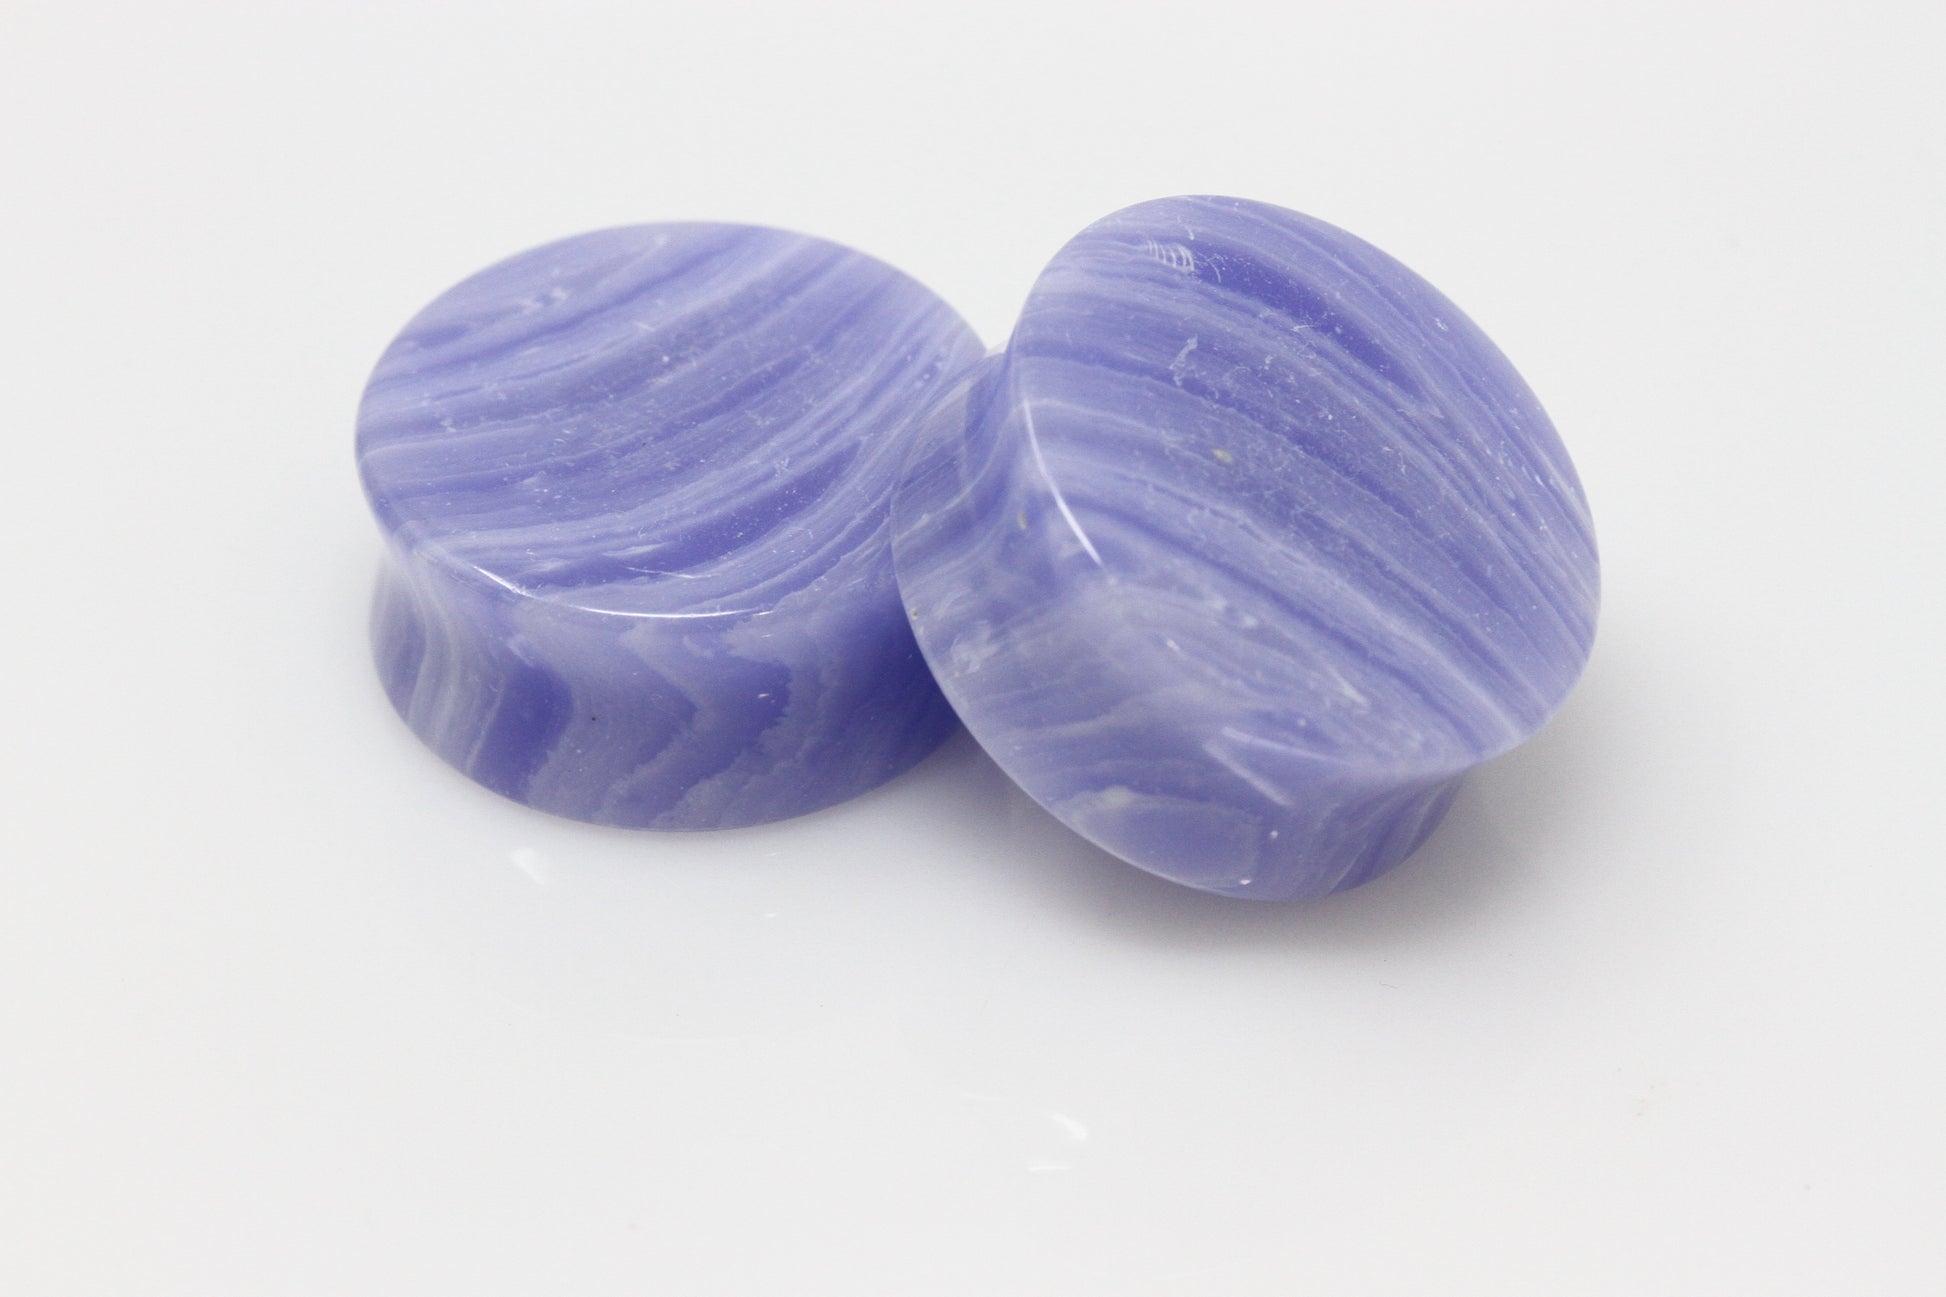 Blue Lace Agate Plugs - WB Pair